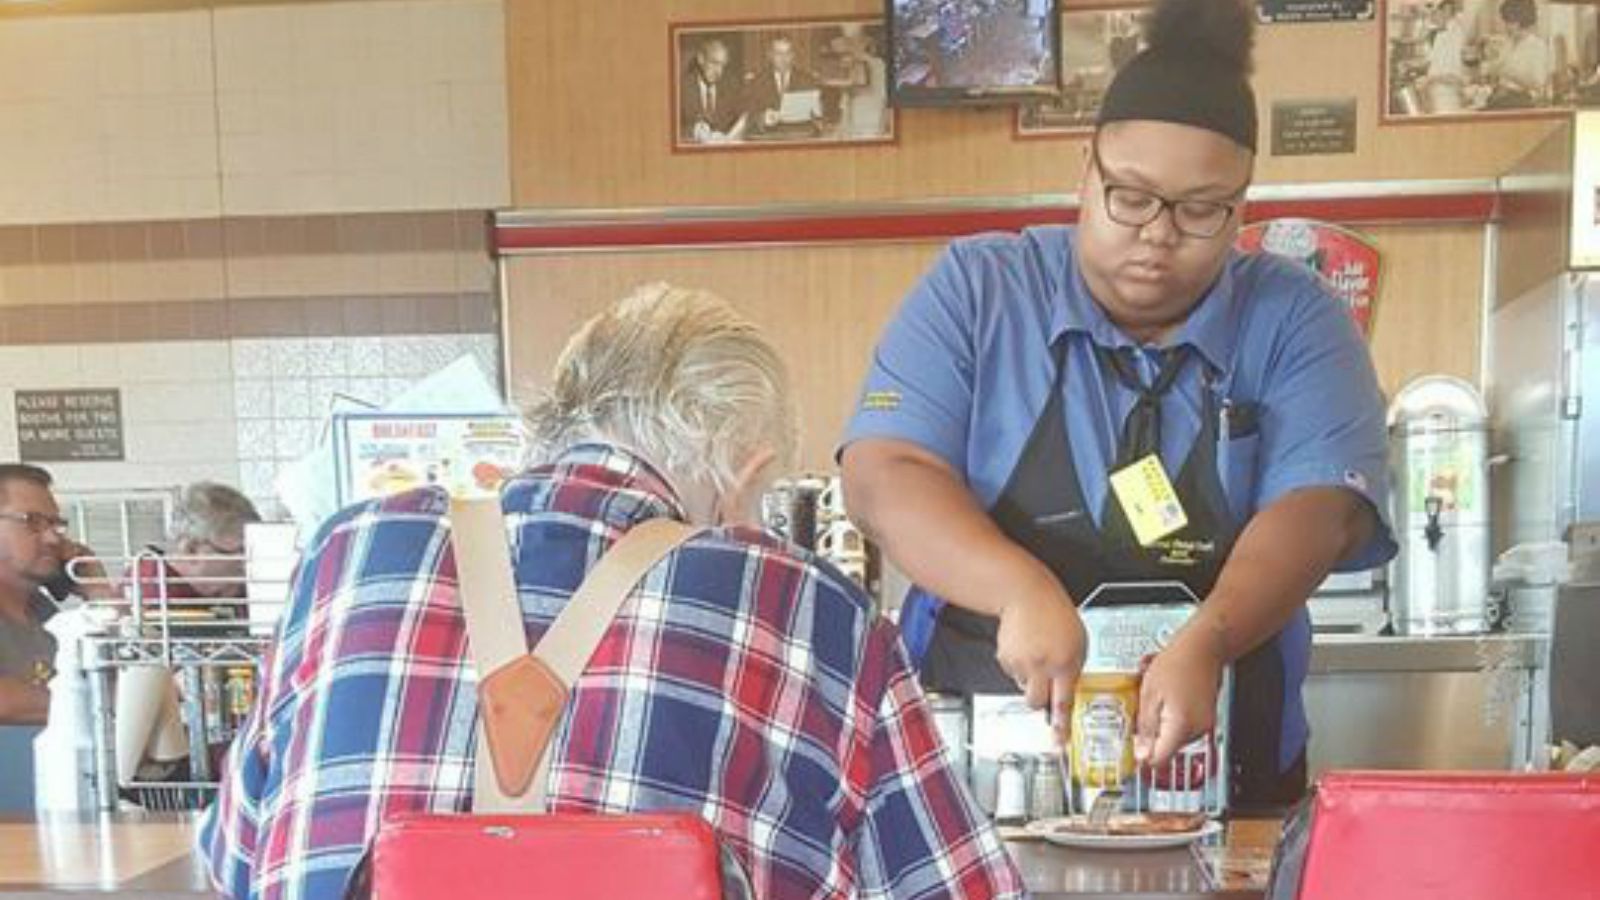 Waitress Helps a Customer with His Meal and Is Presented with a College Scholarship by the Mayor